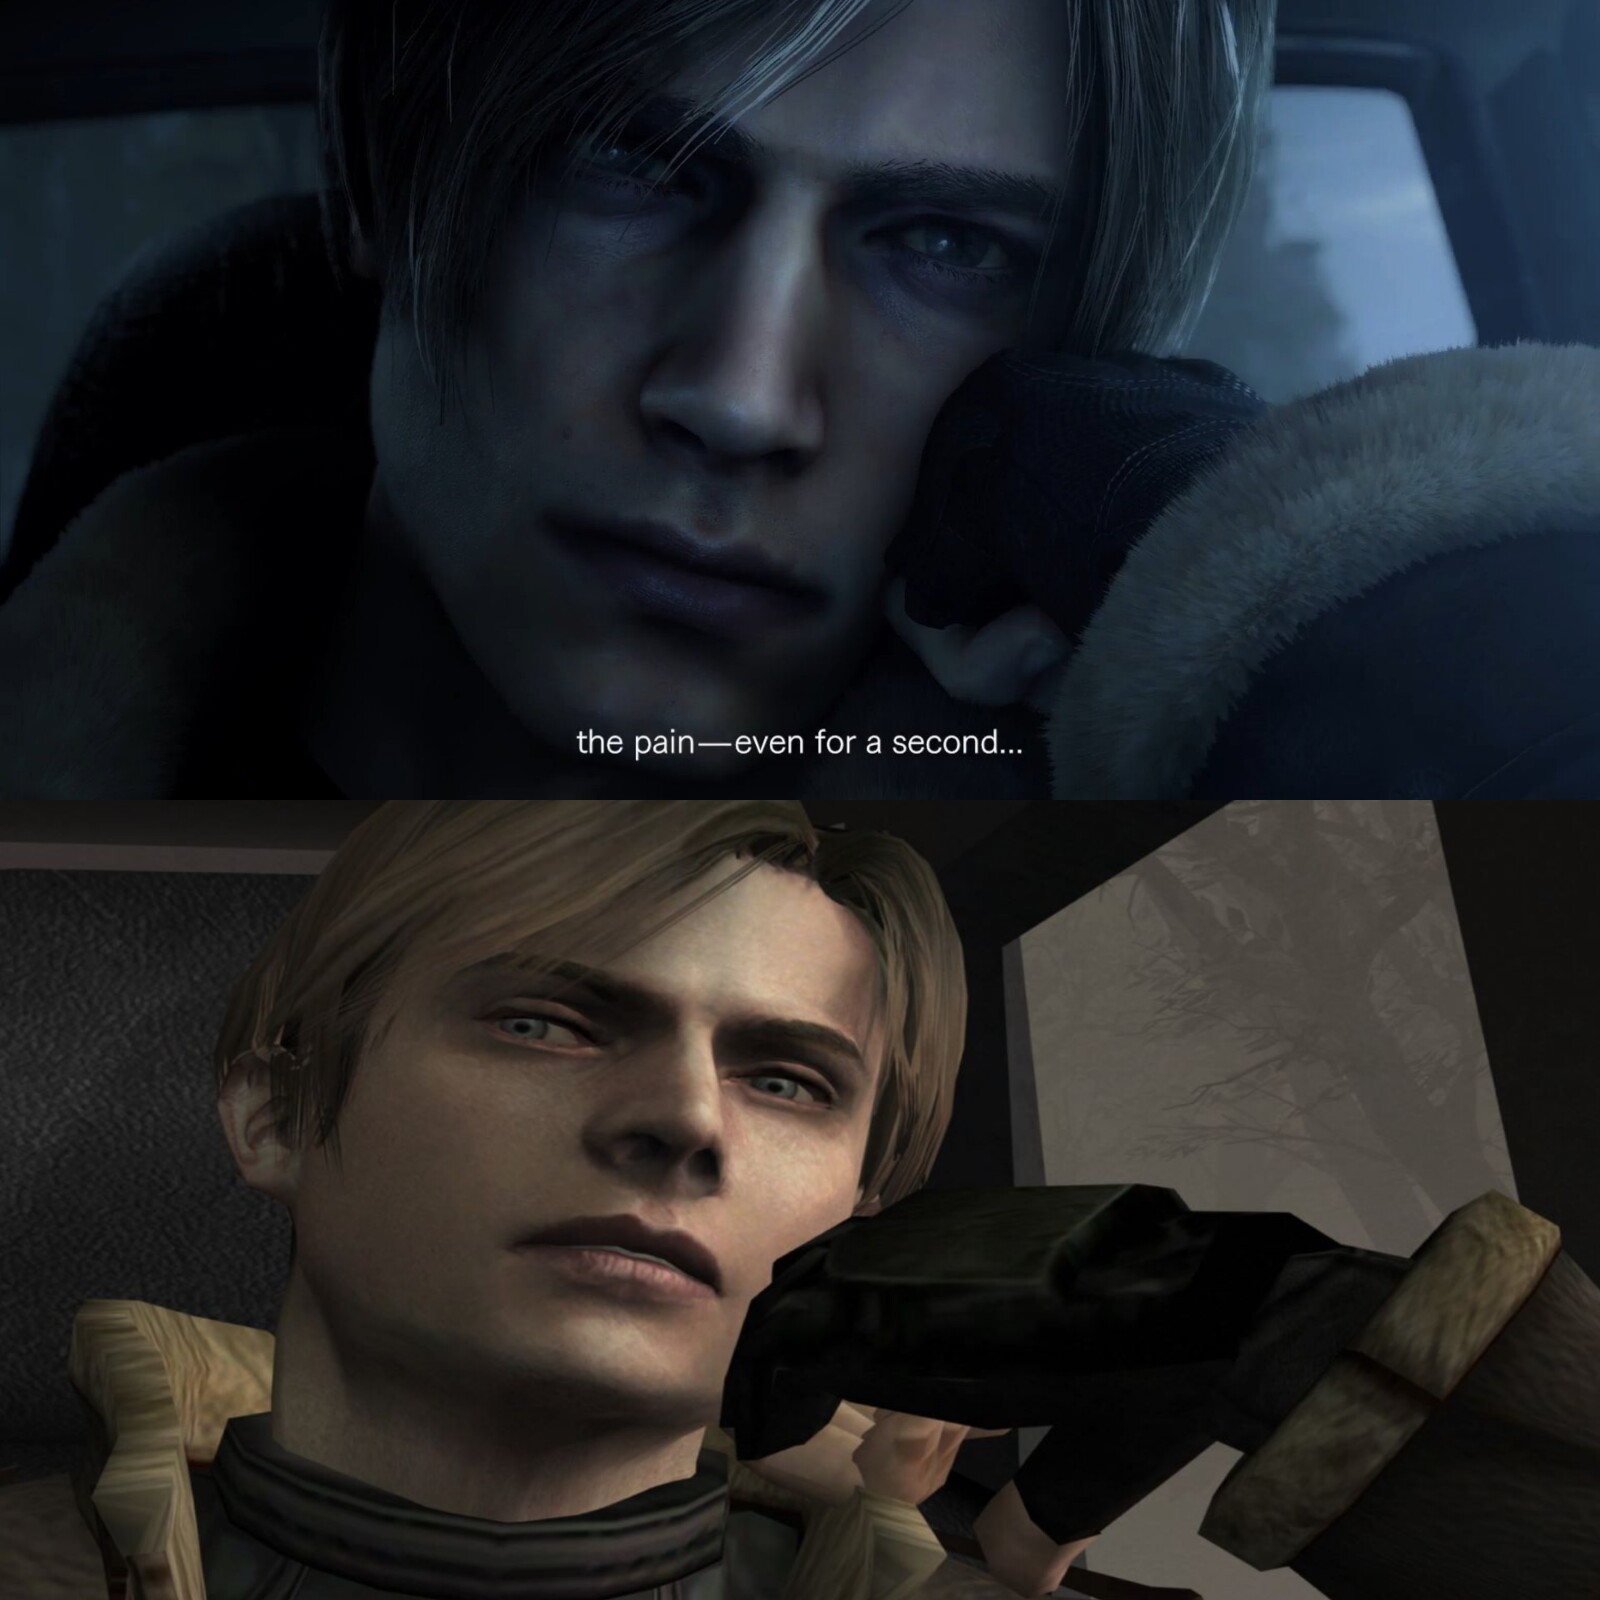 Resident Evil 4 wants to be The Last of Us and it's getting creepy